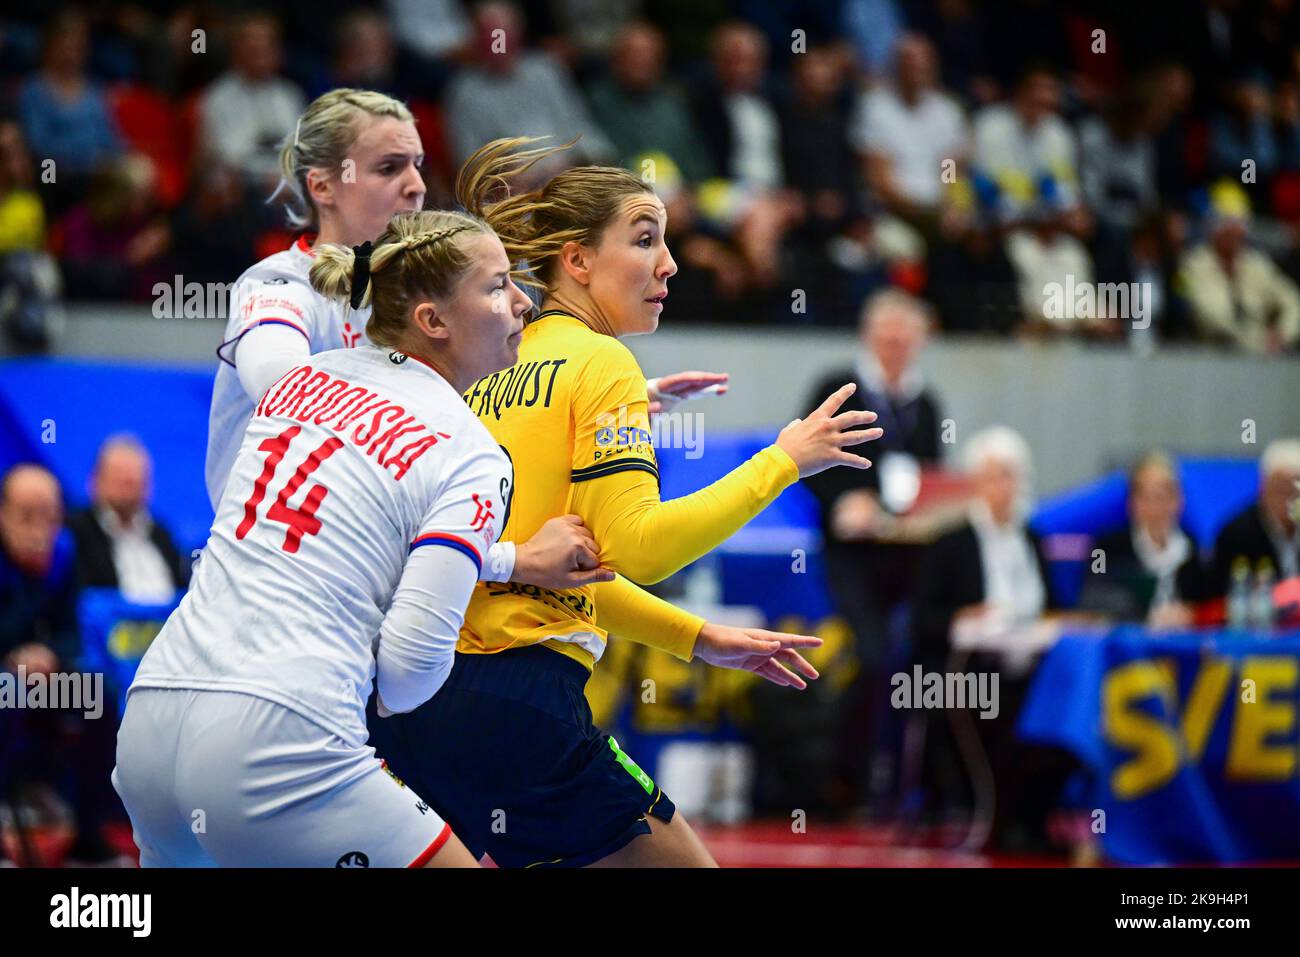 Sweden's Anna Lagerquist (R) and Kamilla Kordovska (#14) of Czech Republic in action during the women's friendly handball match between Sweden and Cze Stock Photo